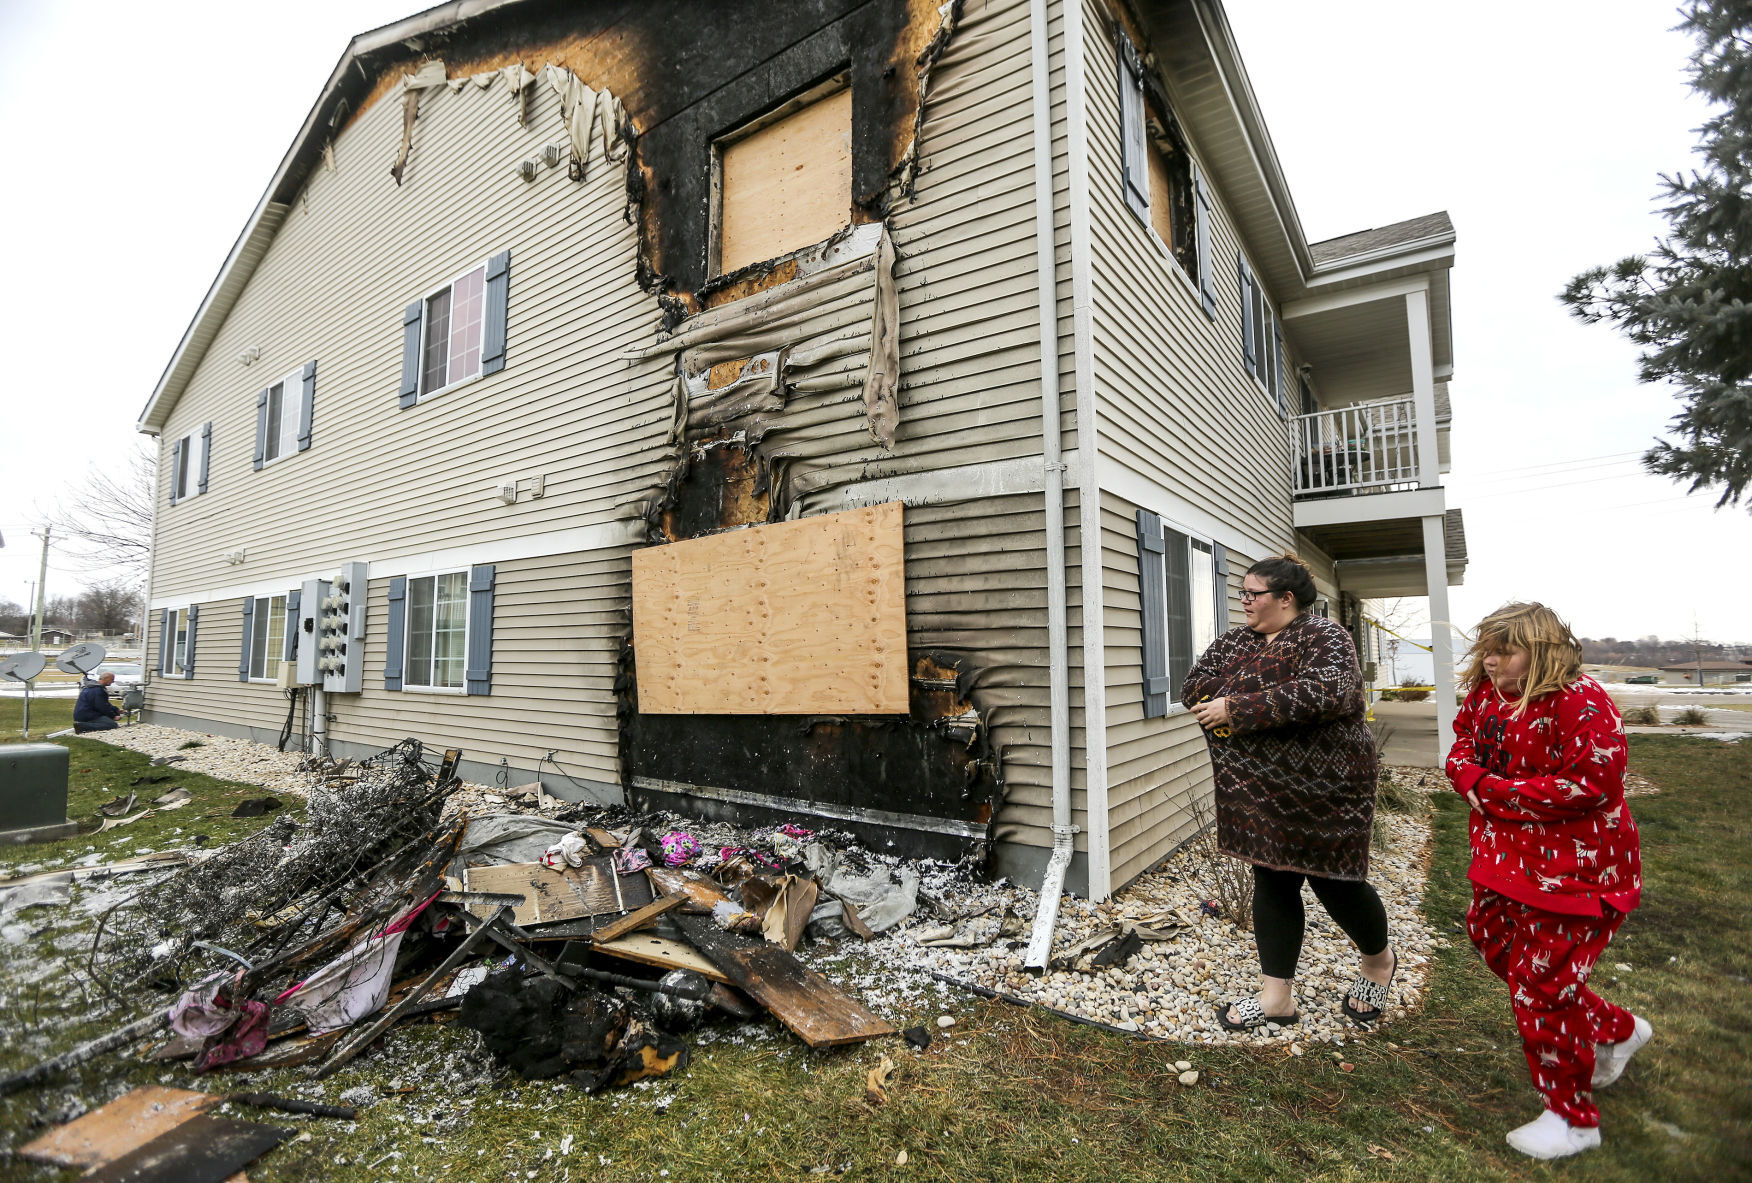 Amber Droessler and her daughter Billie Jean Shaffer, 10, look at the damage to their apartment, which is located directly beneath a unit that had a fire Tuesday night in Cuba City, Wis. PHOTO CREDIT: Dave Kettering